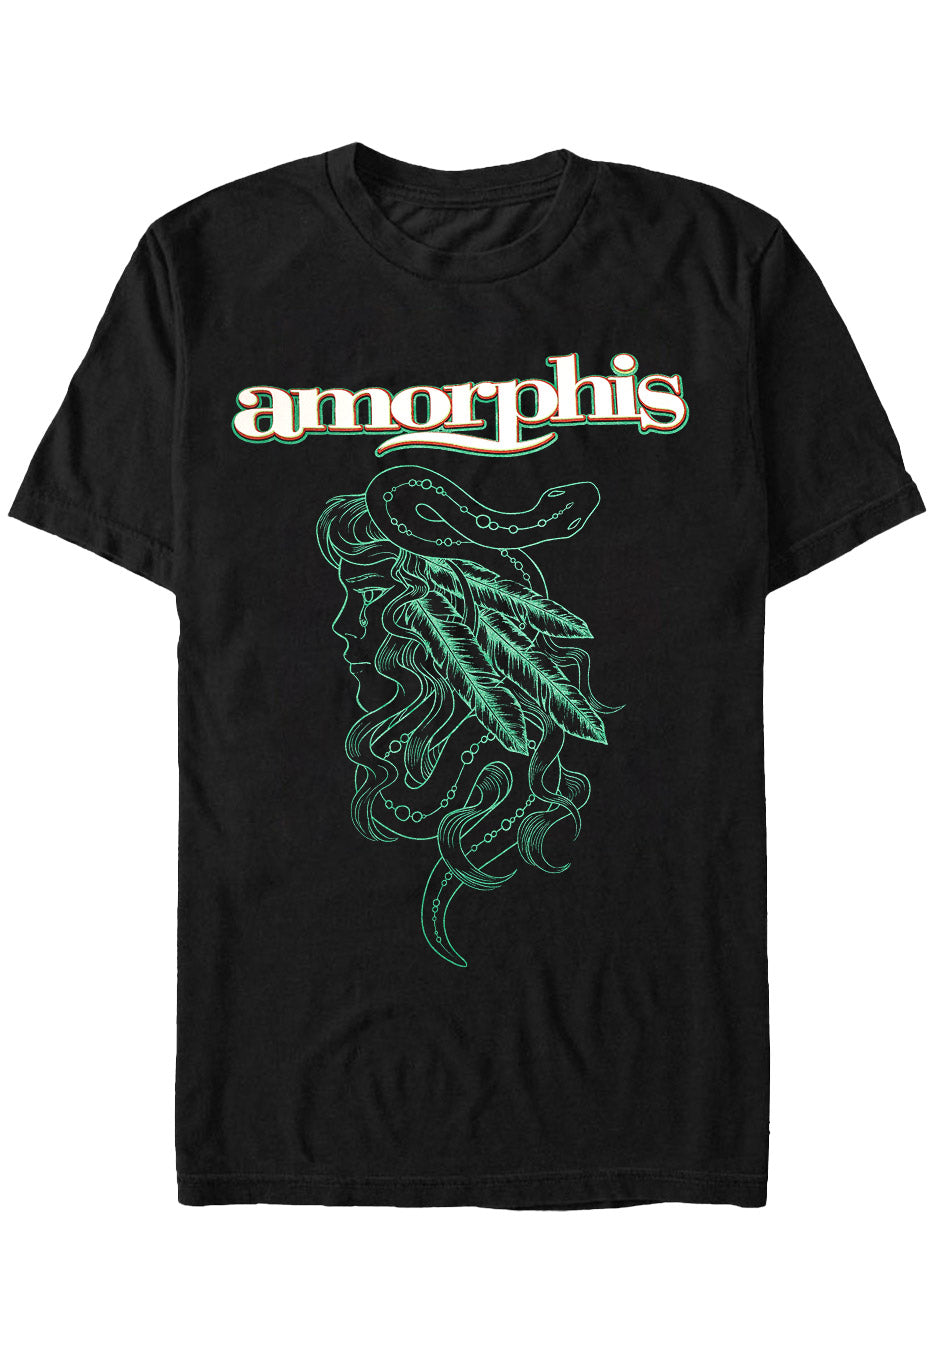 Amorphis - Daughter Of Hate - T-Shirt